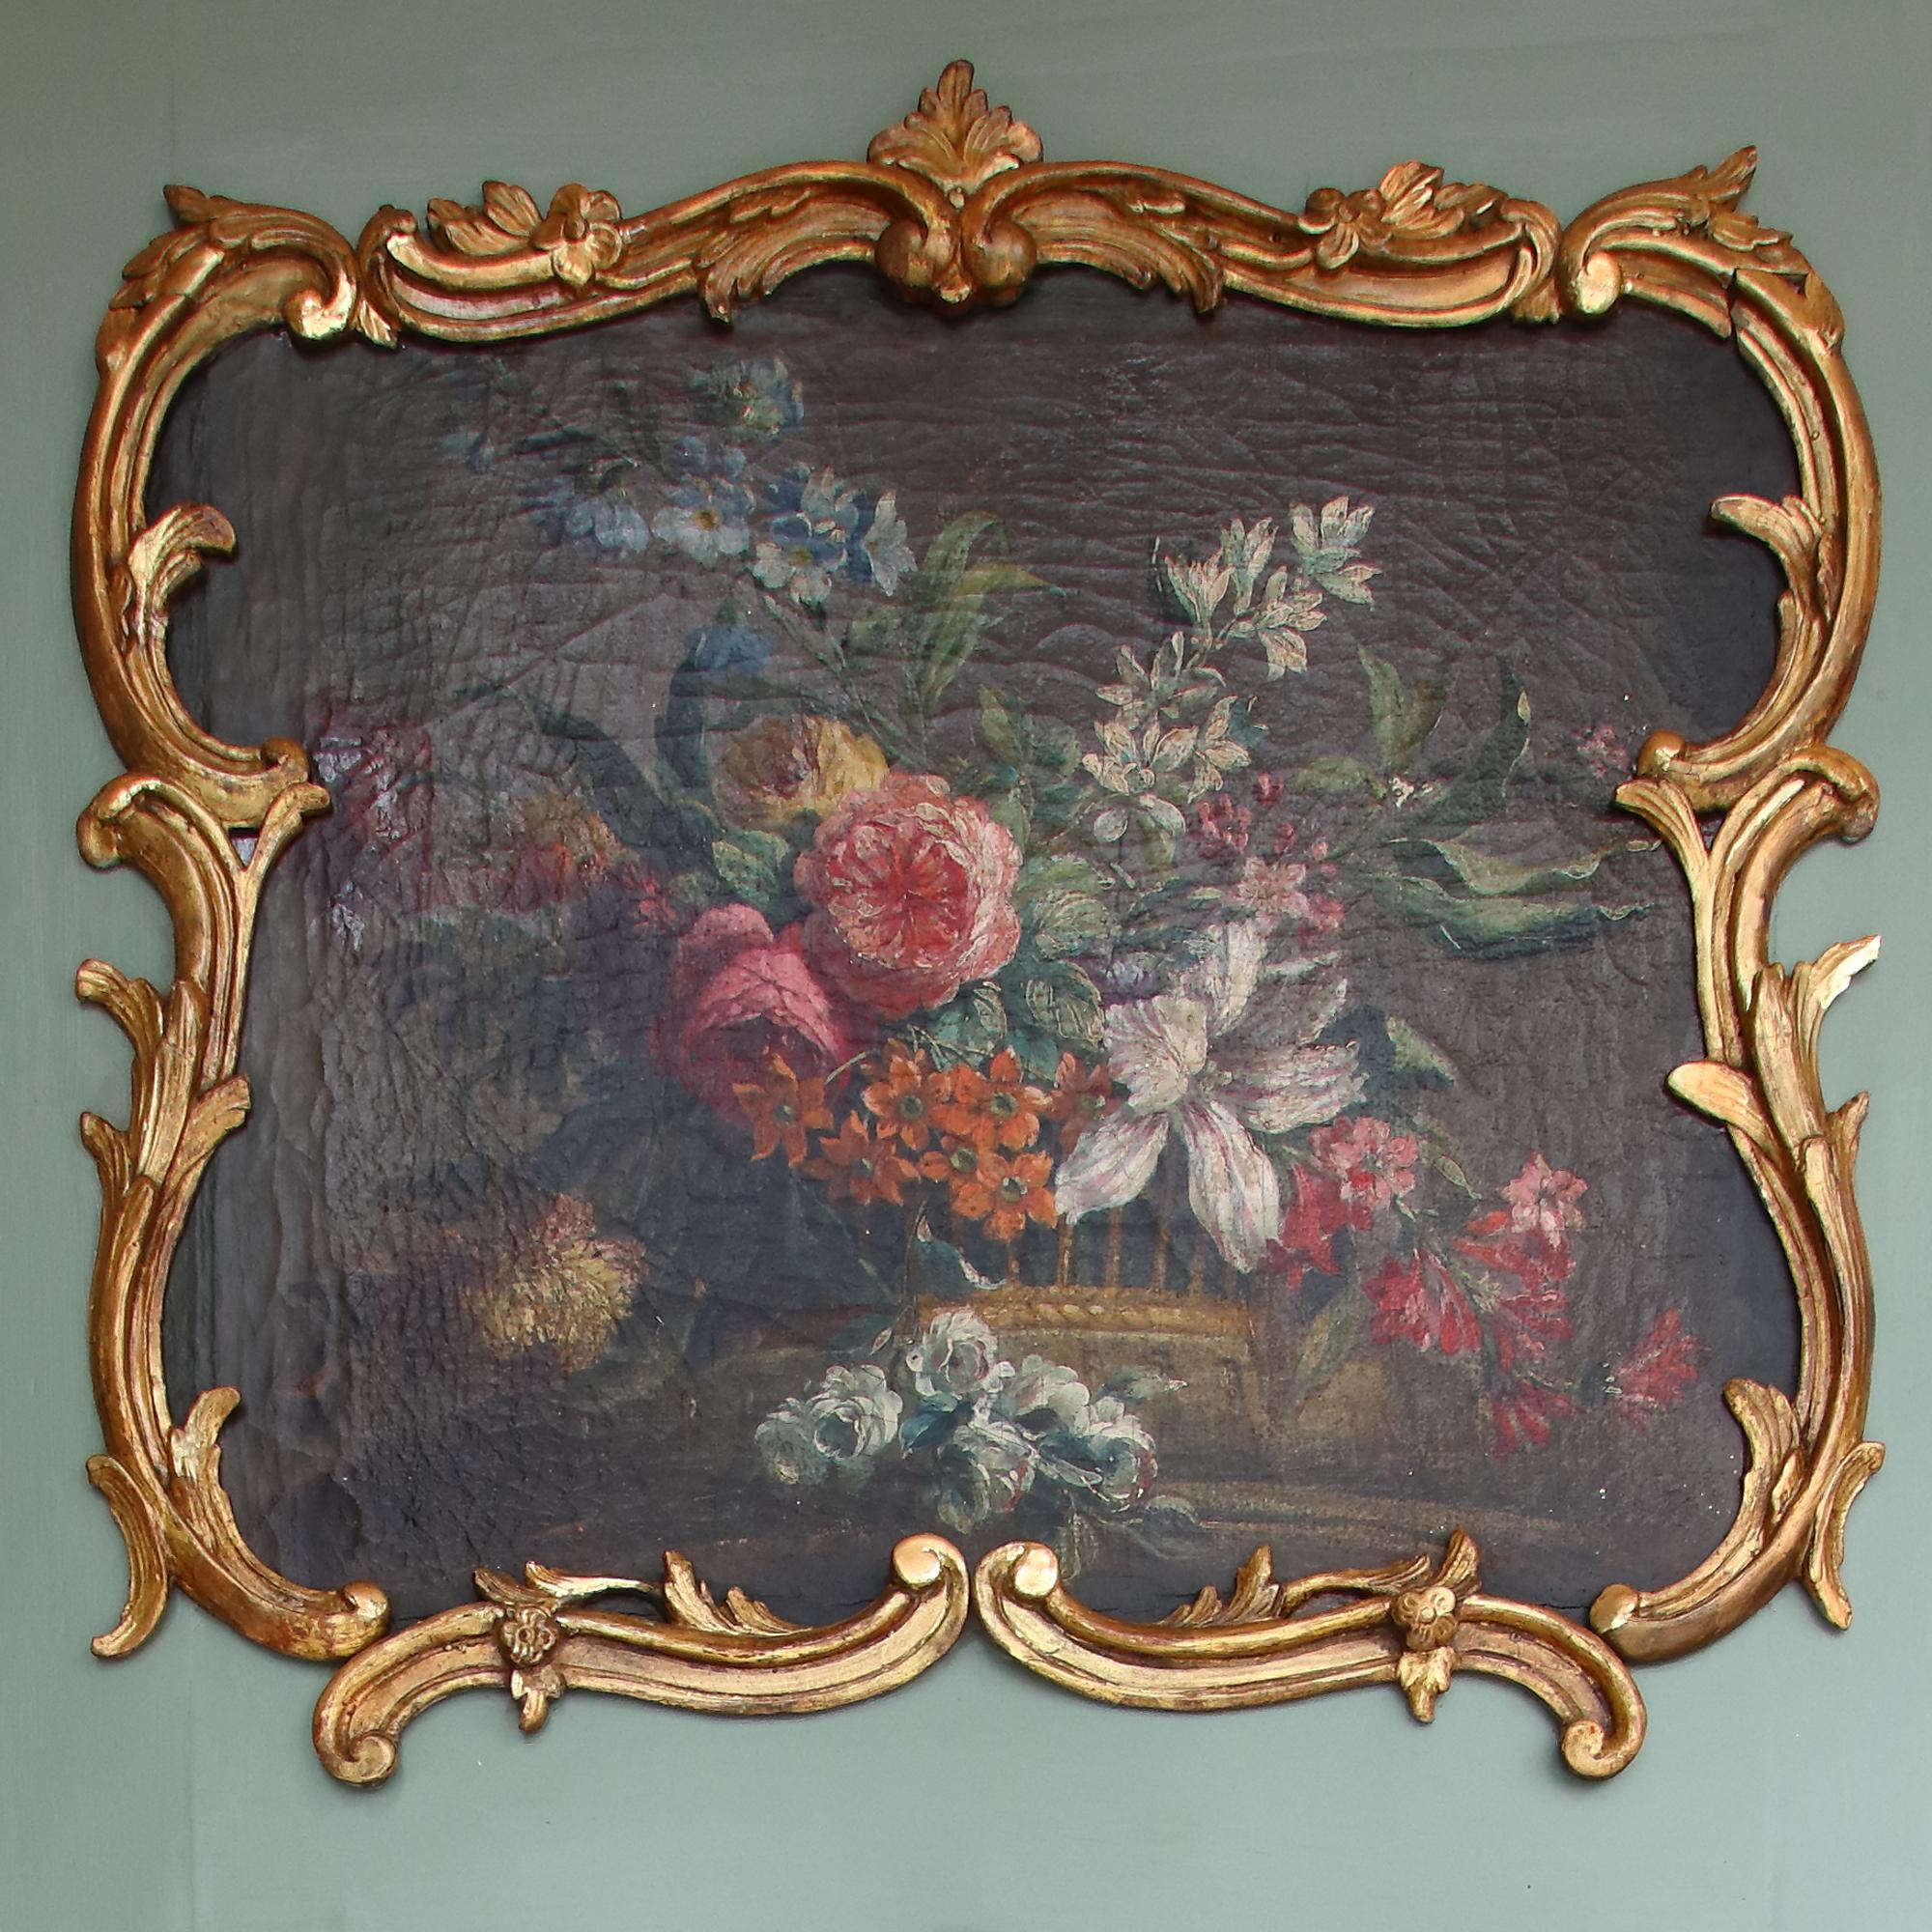 18th Century French Louis XV period flower still life trumeau wall mirror

Of rectangular shape, the lower part of the French Green painted trumeau holding the mirror plate (26.378 in./67 cm x 25 in. /63,5 cm) within a rectangular giltwood frame